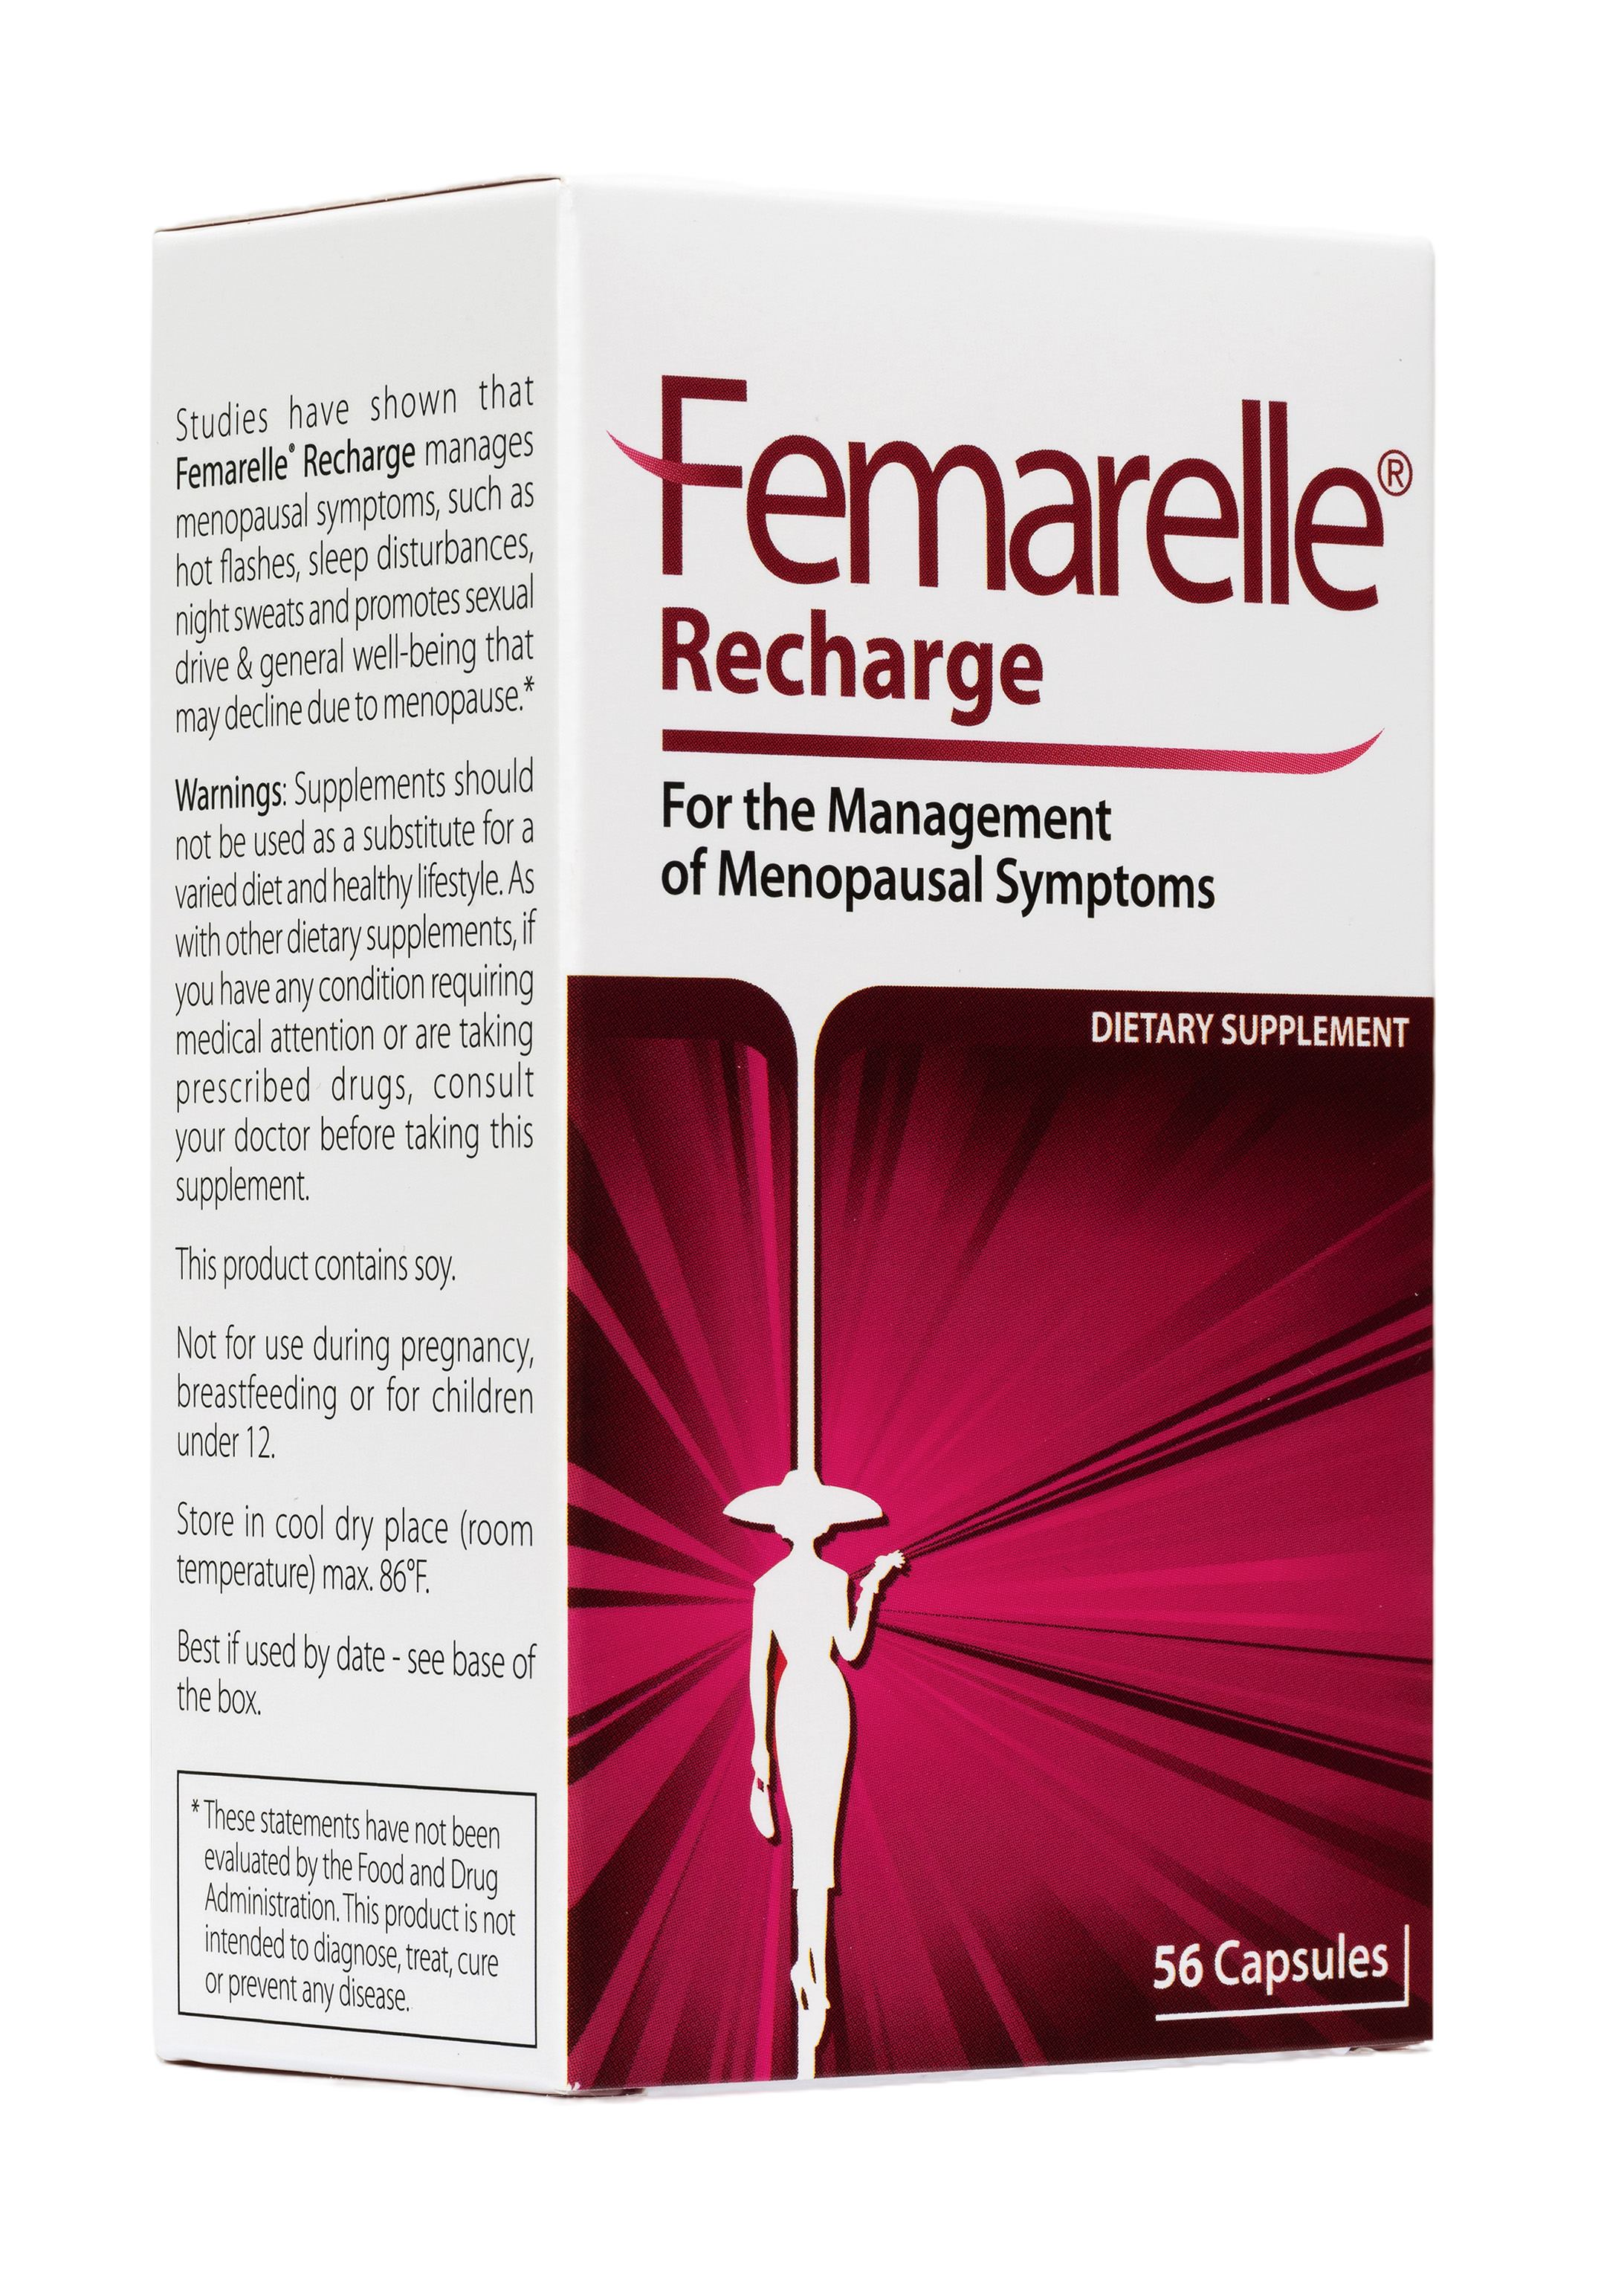 Femarelle Recharge for the management of menopausal symptoms